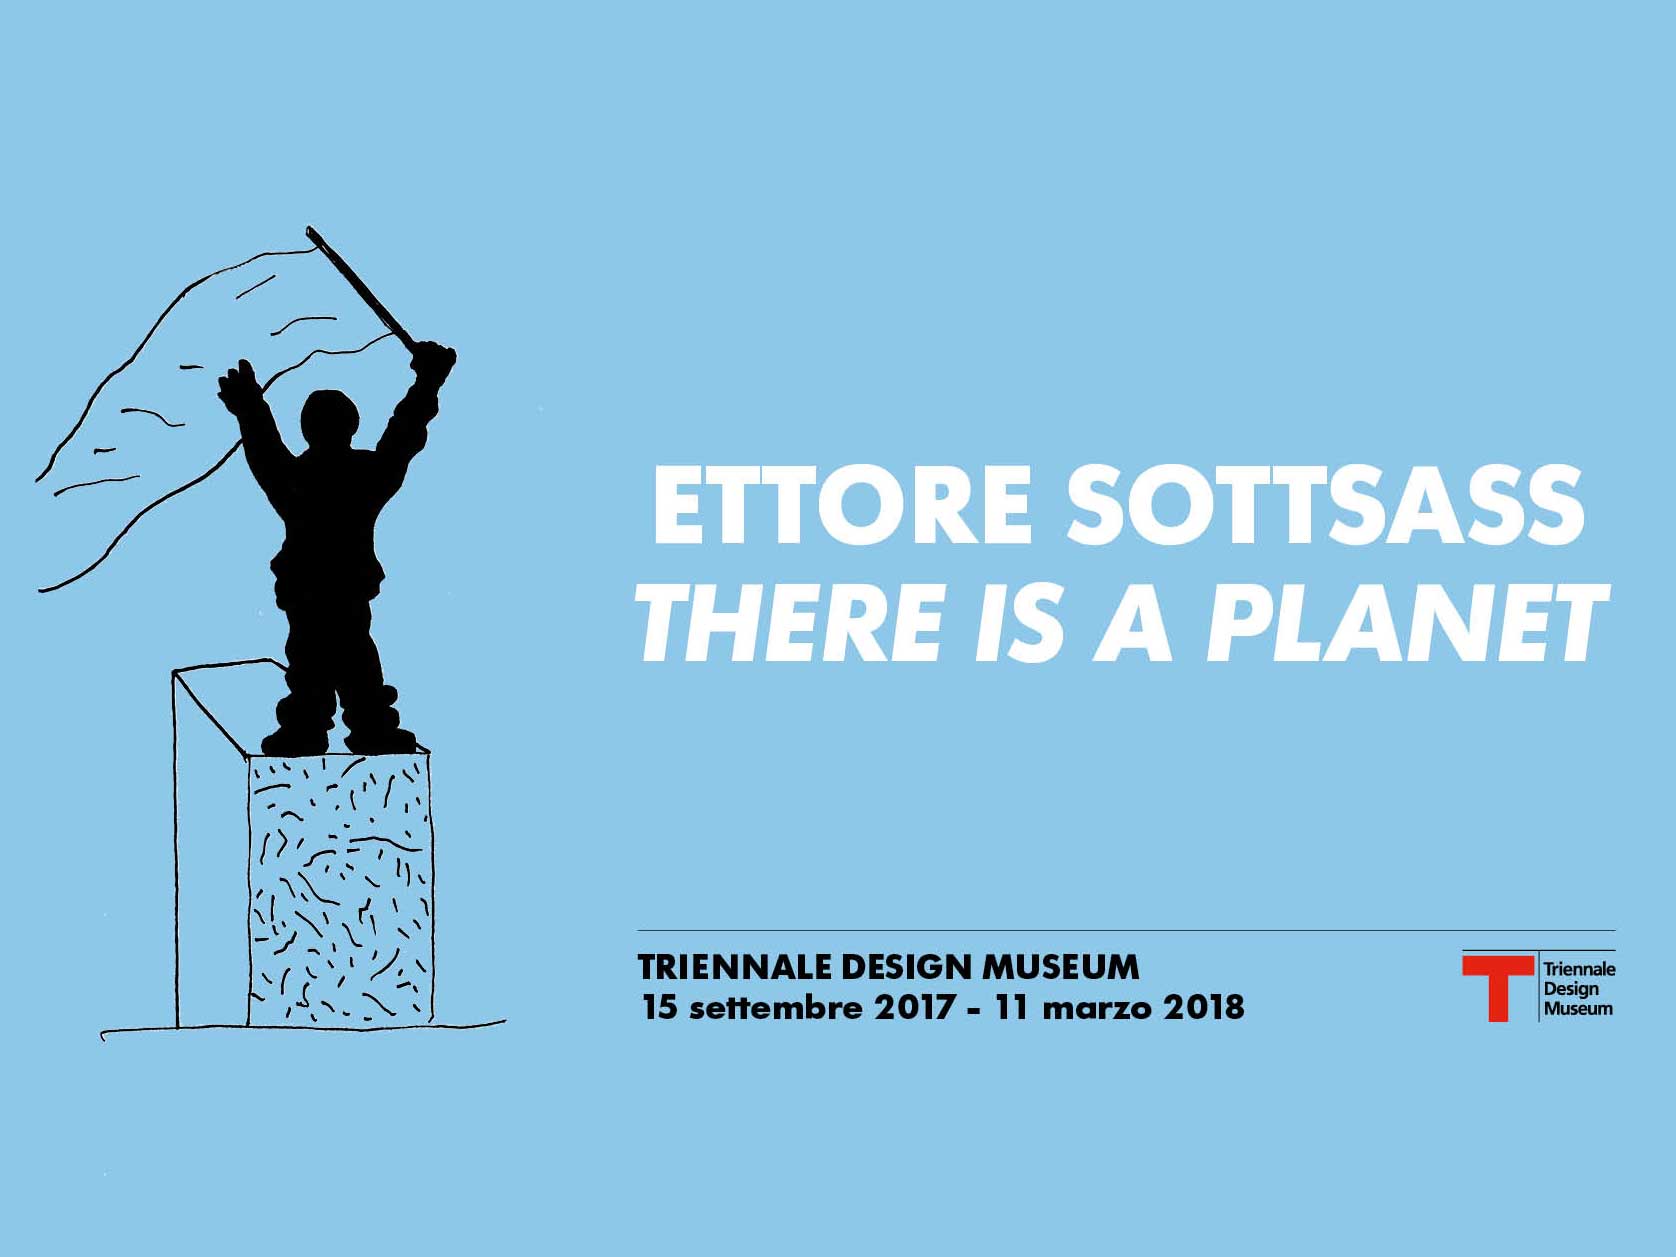 &quot;Ettore Sottsass, there is a planet&quot;